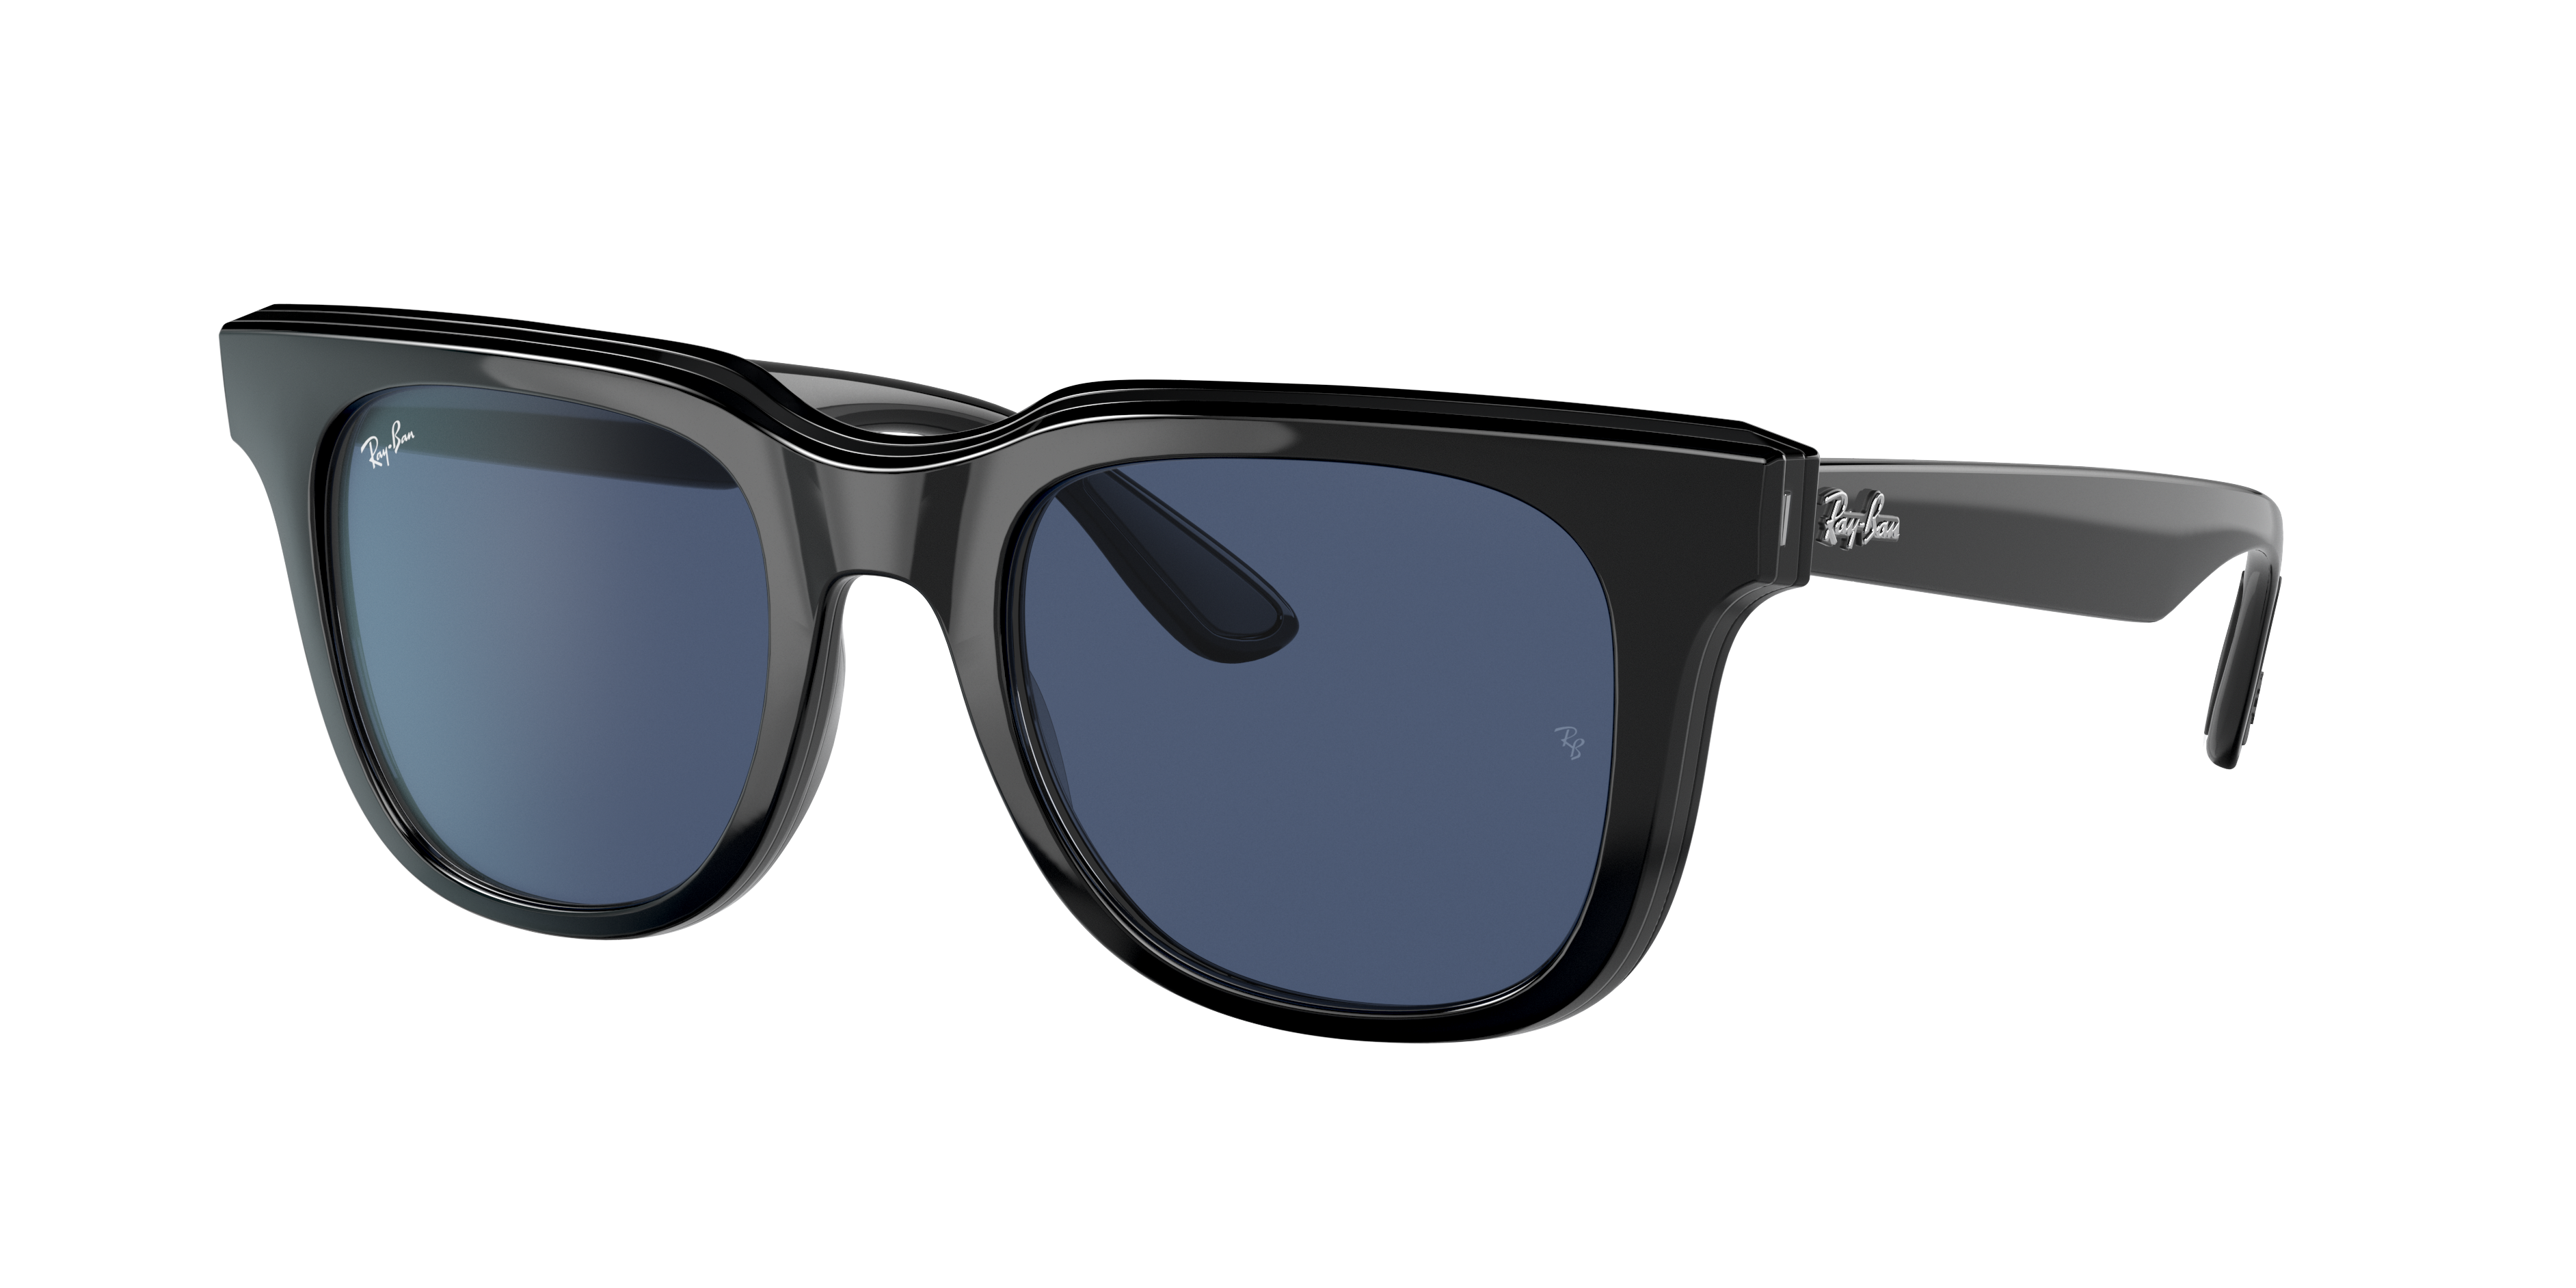 Check out the Rb4368 at ray-ban.com